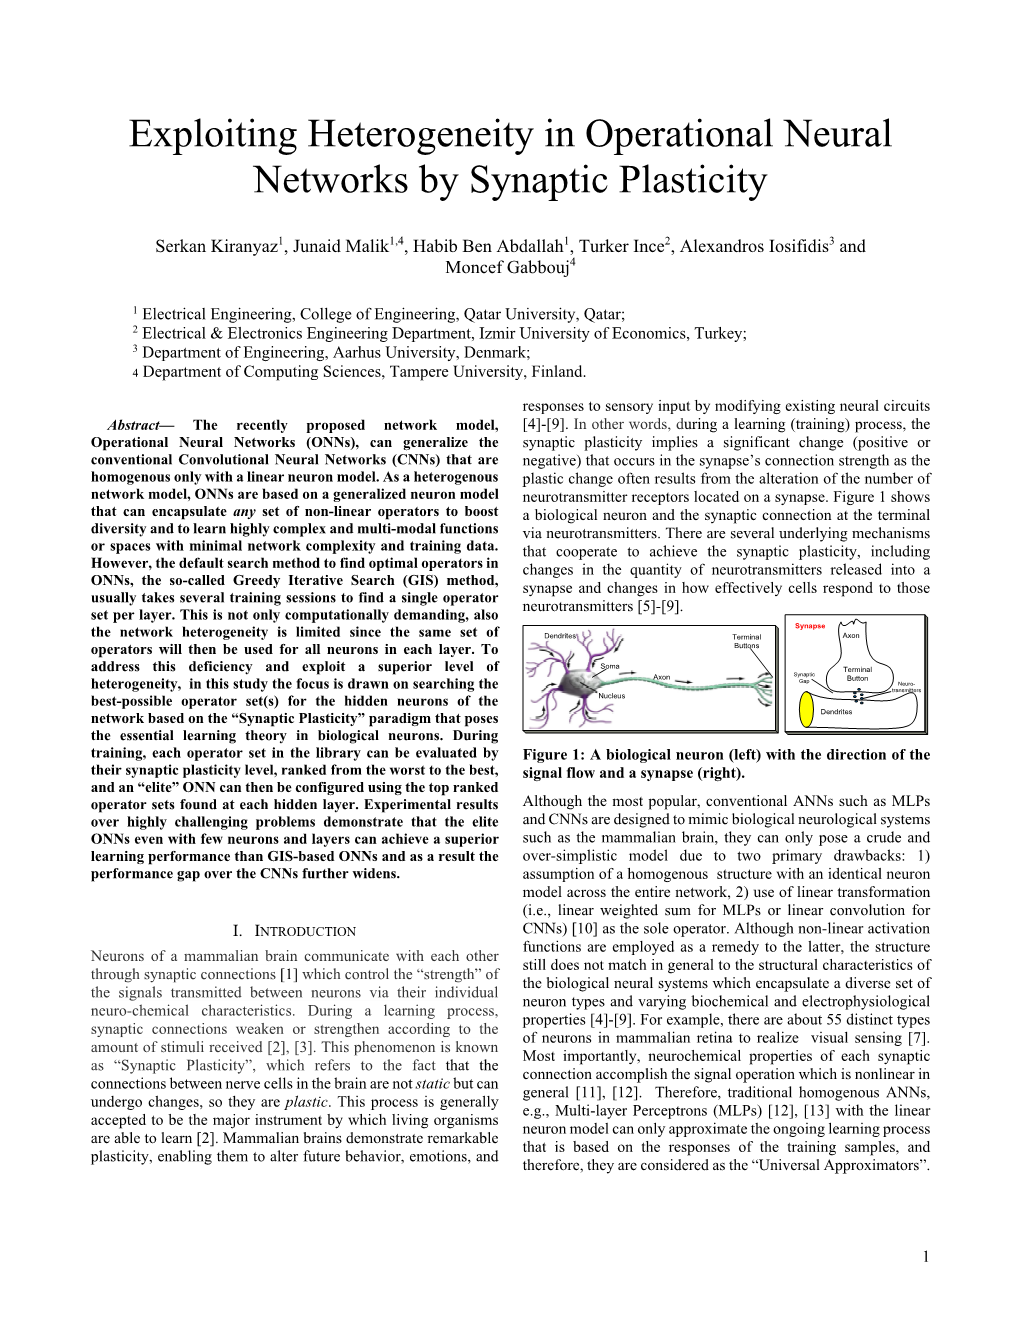 Exploiting Heterogeneity in Operational Neural Networks by Synaptic Plasticity